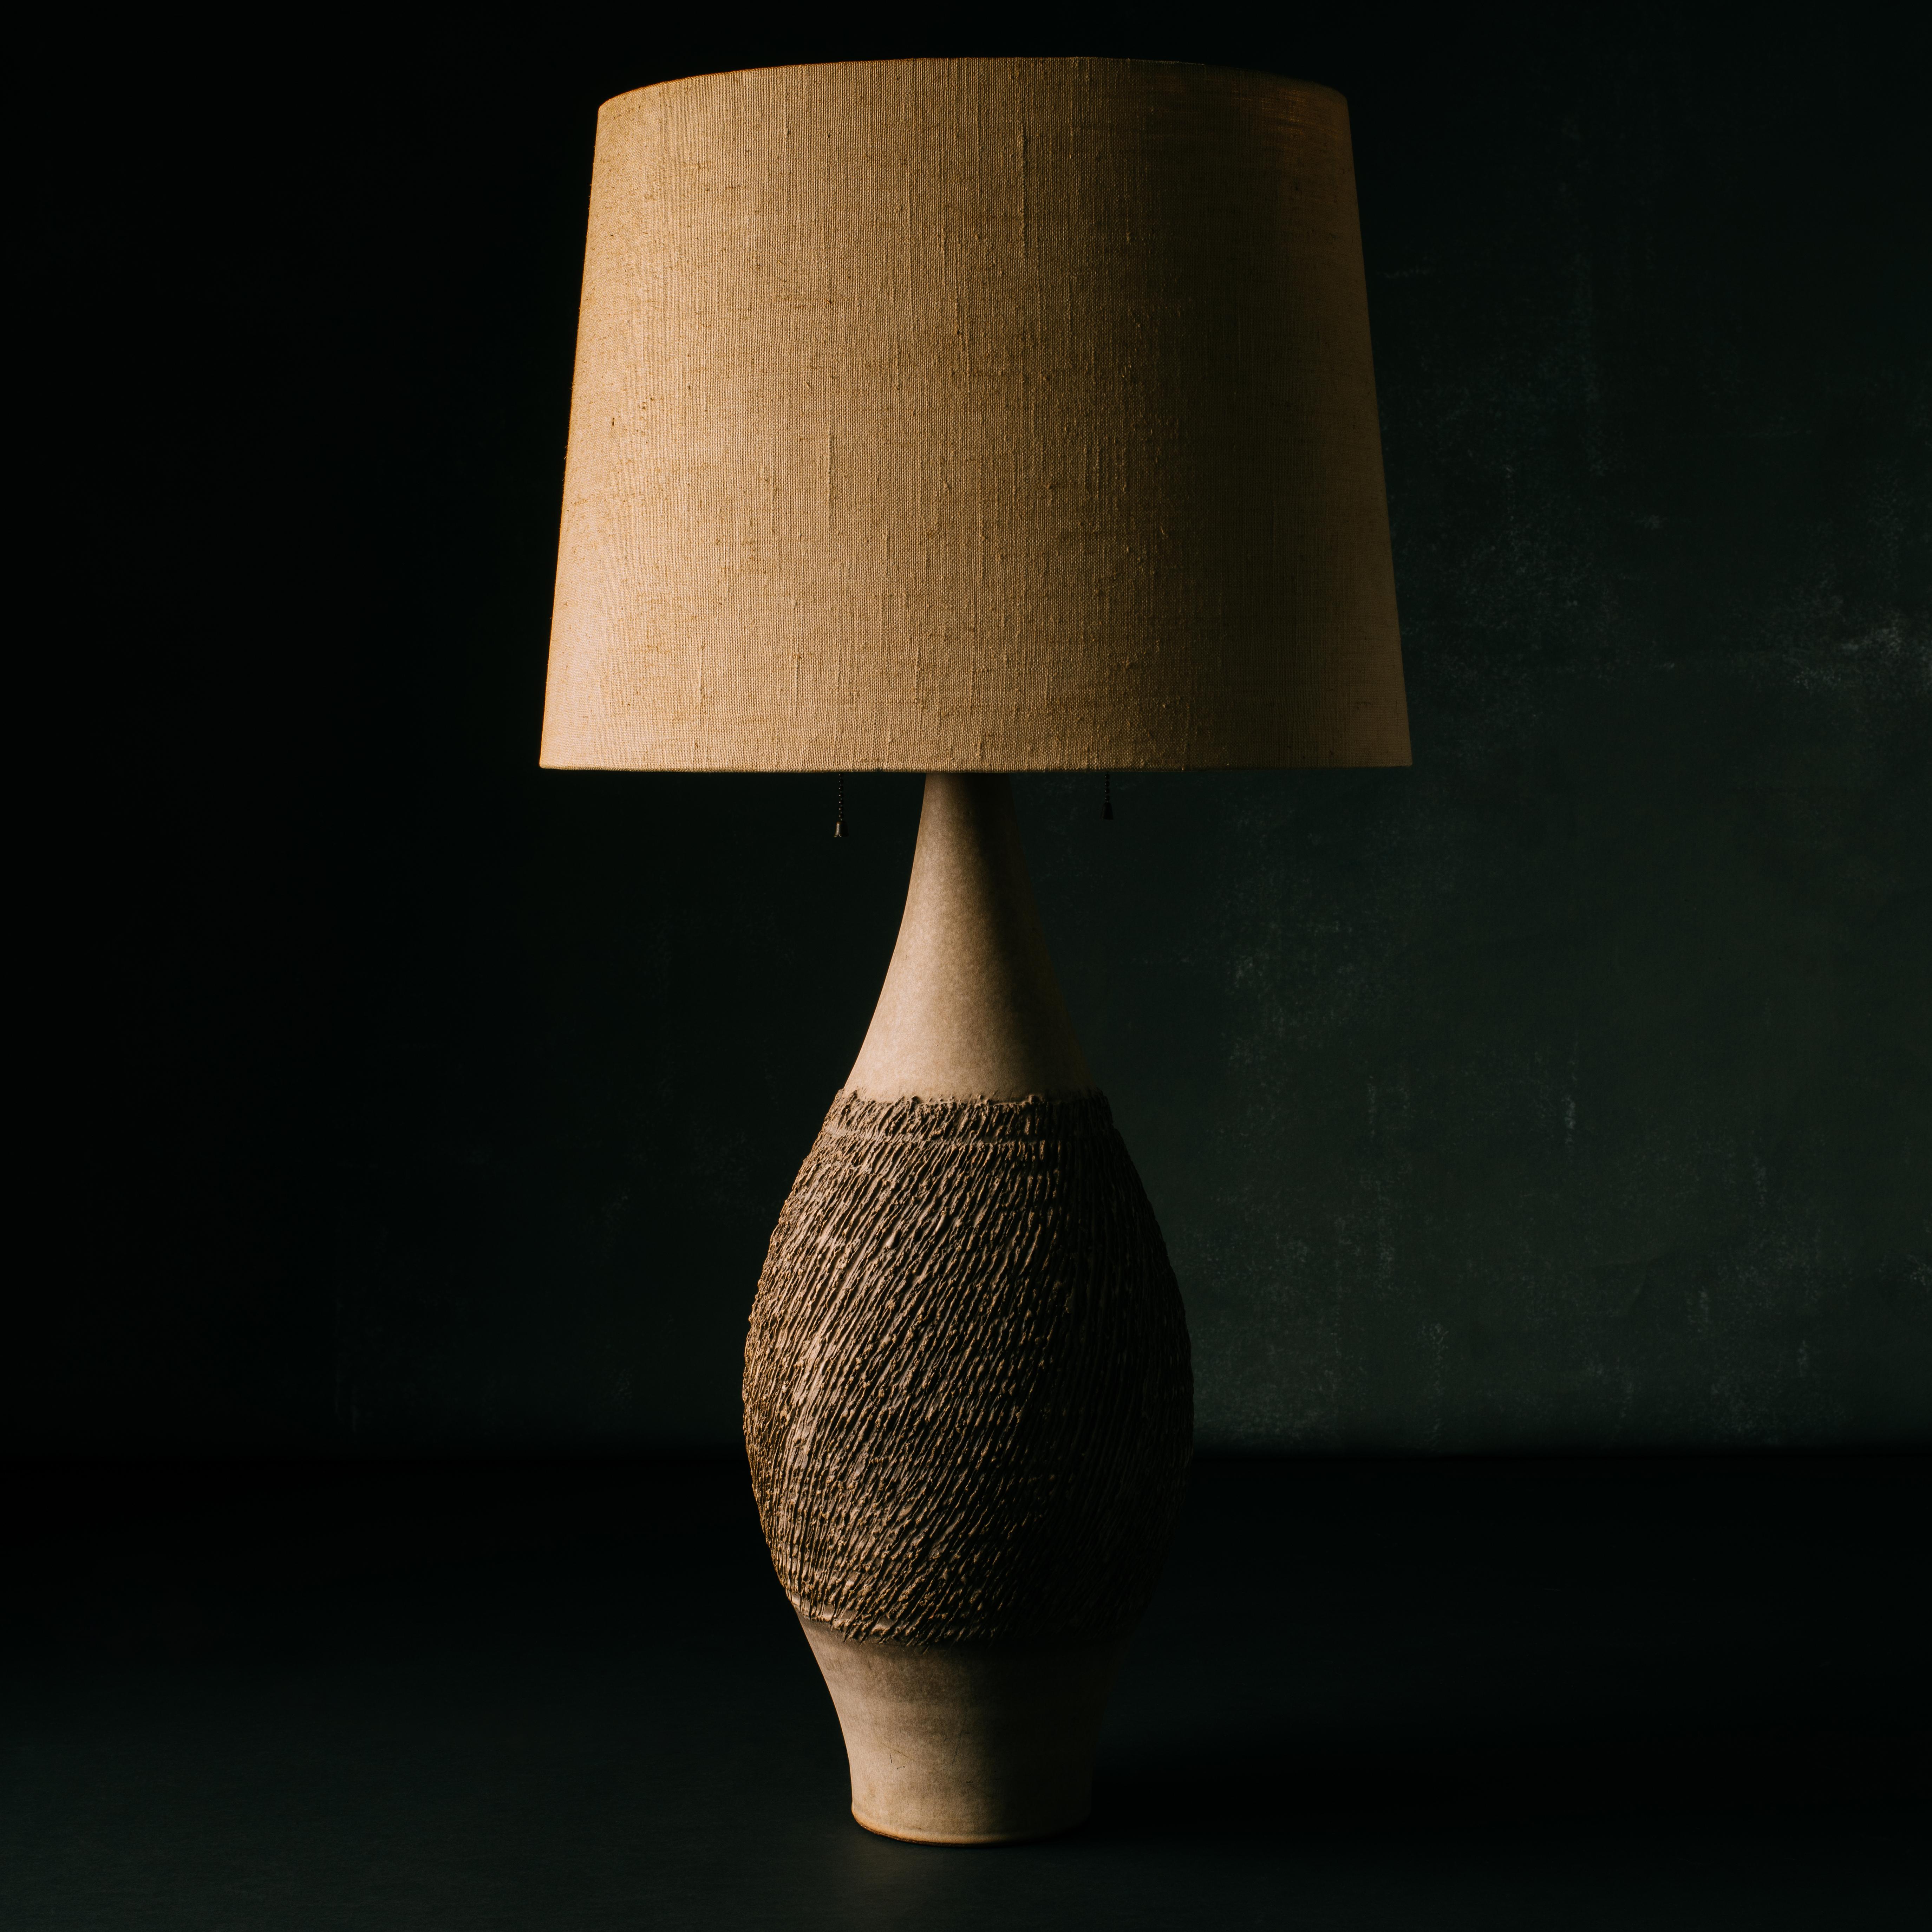 Large scale, handthrown ceramic table lamp from the 3300 Series designed by Lee Rosen for Design Technics with a matte, neutral beige body and hand-applied, organic design finished in a brown glaze. Lamp has its original double socket with a milk